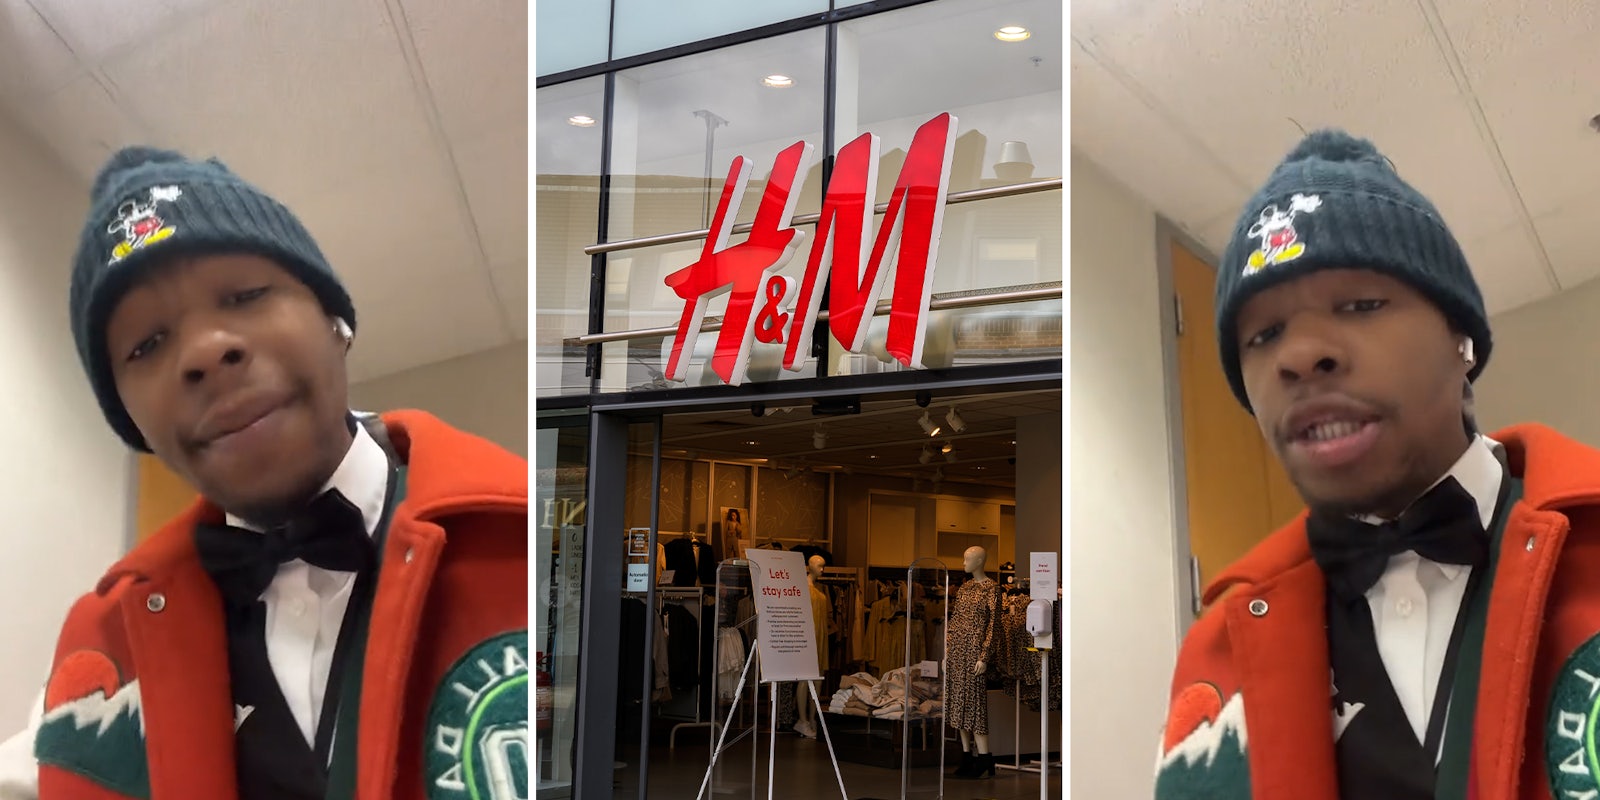 Man says H&M employee tried to scam him, almost got him in trouble when sensors went off on his way out